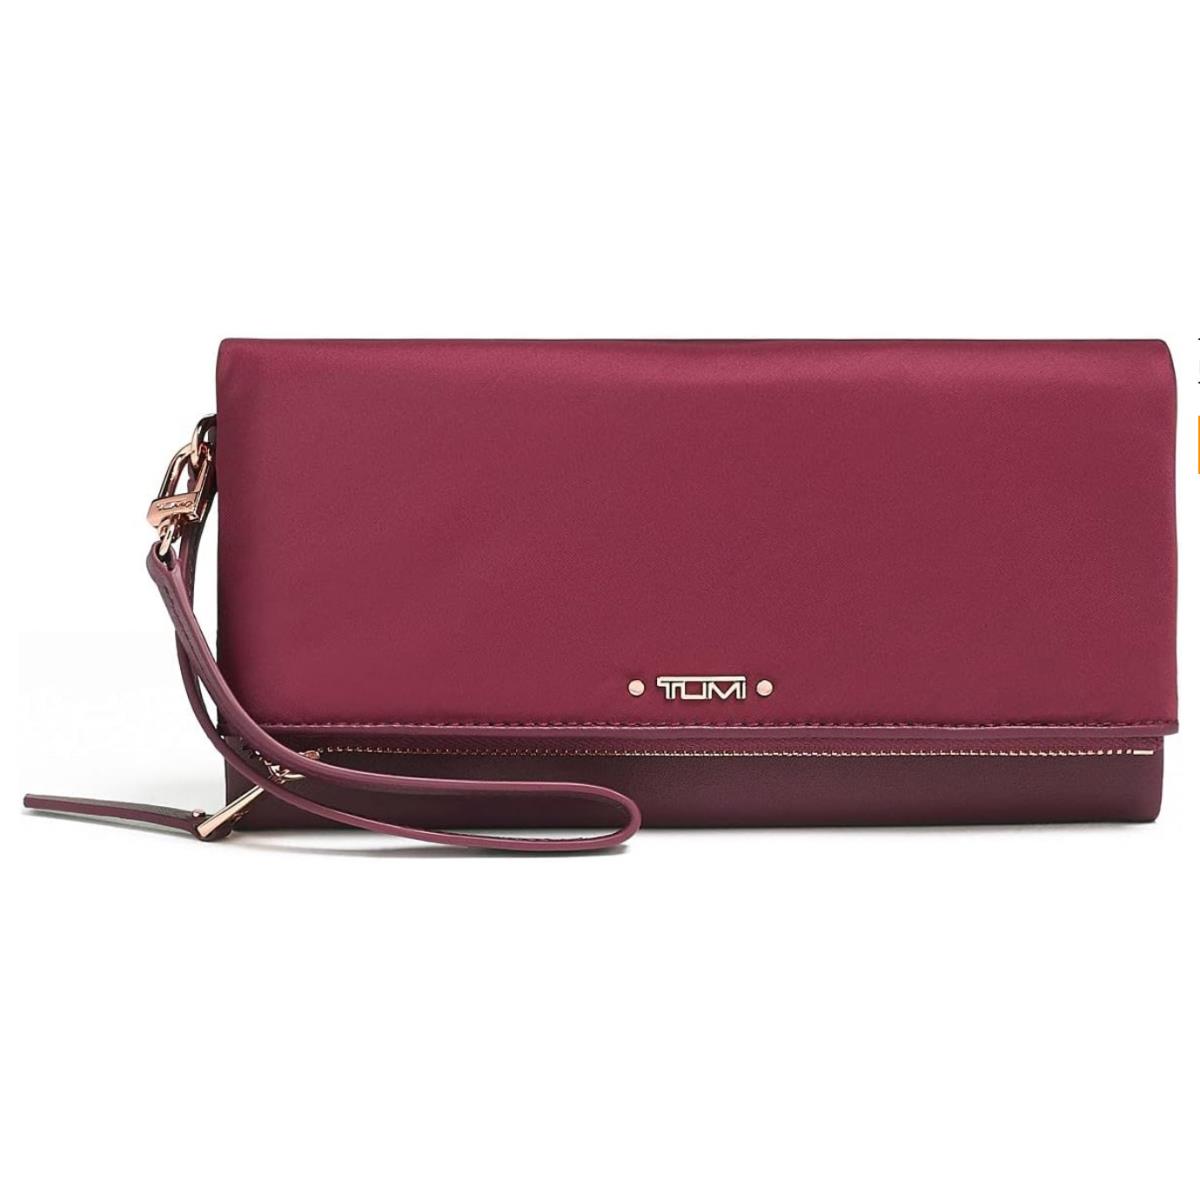 Tumi Voyageur Slg Travel Wallet / Wristlet Berry Red Gold Hardw in Gift Box